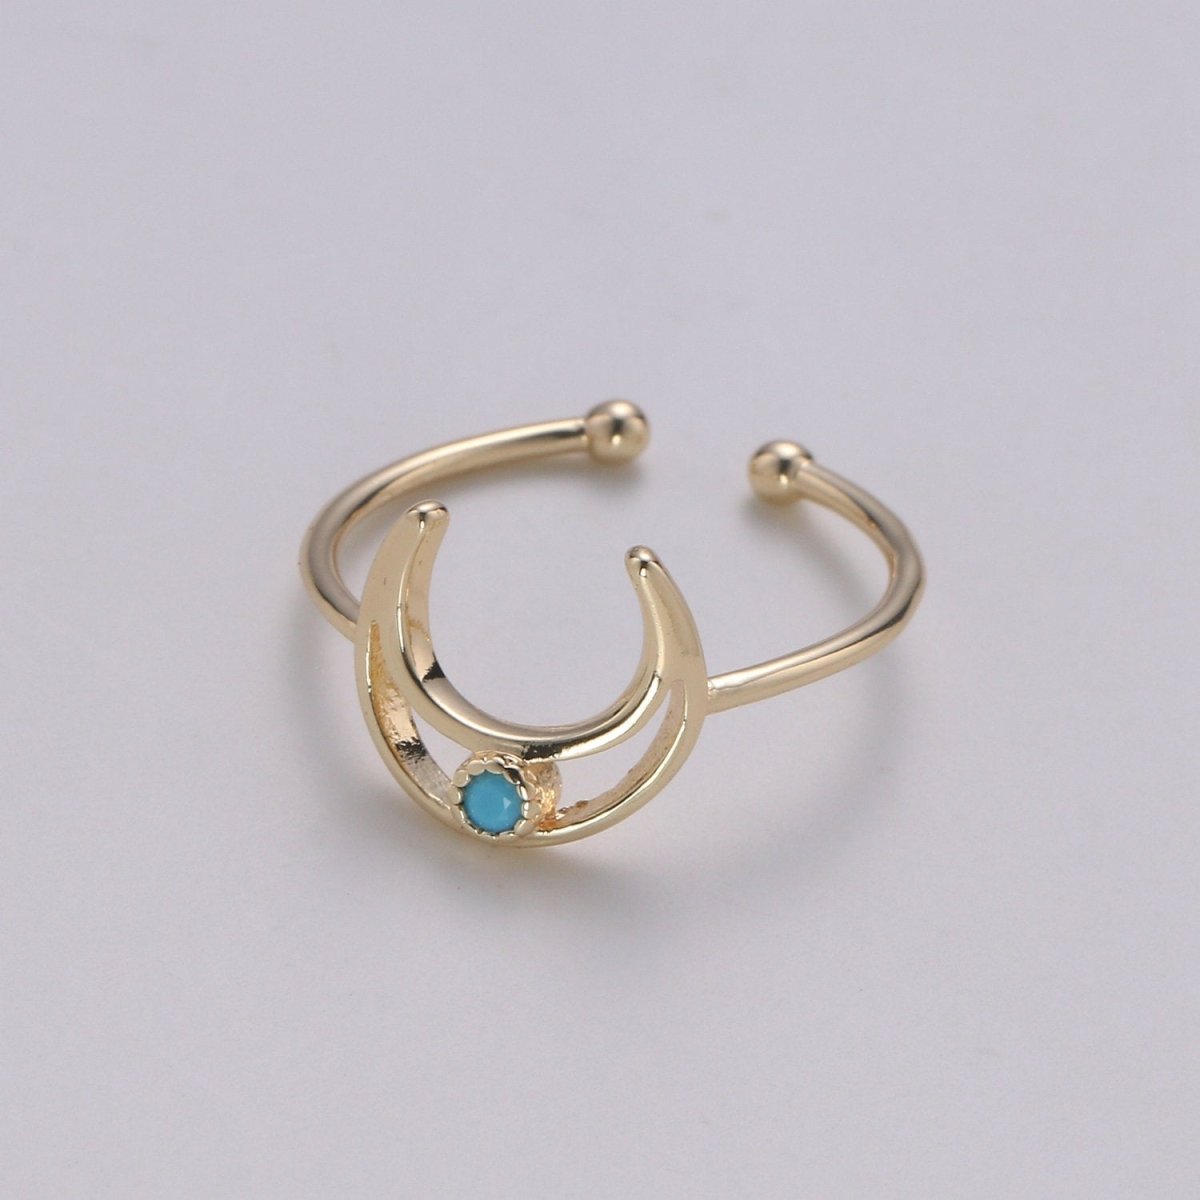 Crescent Moon Ring, Open Moon Ring, Turqouise ring, Blue Moon Ring, Celestial Jewelry, Adjustable Gold Open Ring, Christmas gift R-111 - DLUXCA